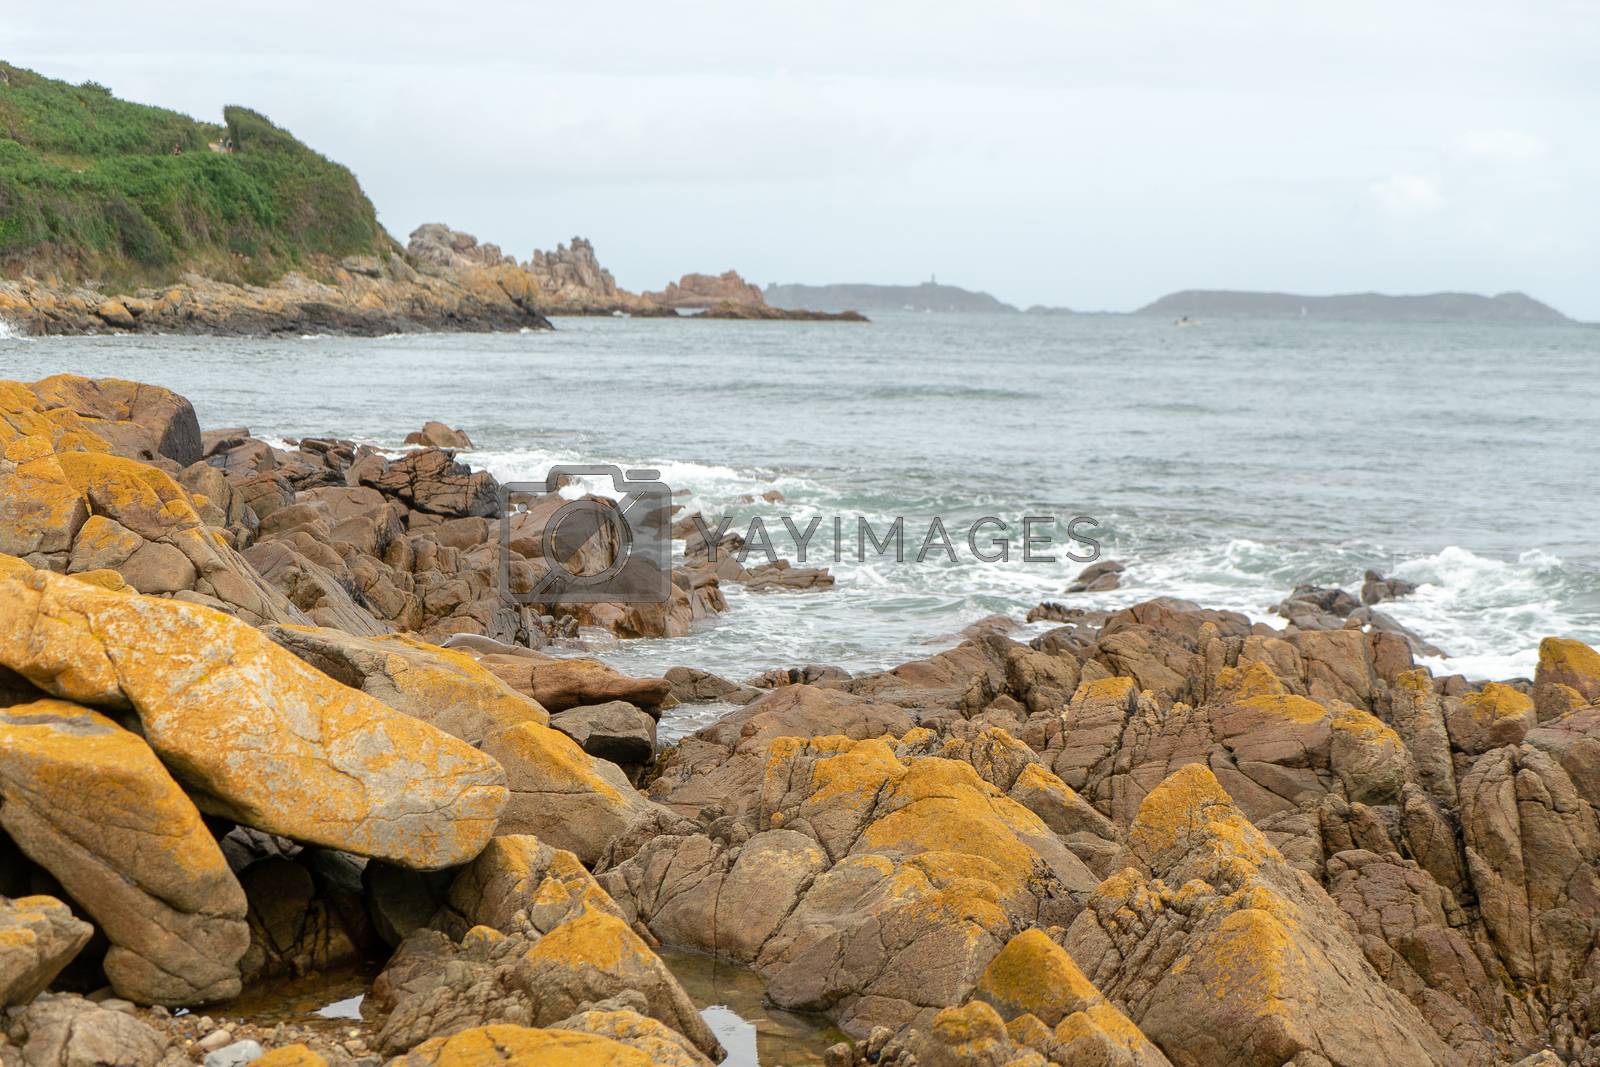 Royalty free image of Hiking on bretagne cotes d'armor coast by javax